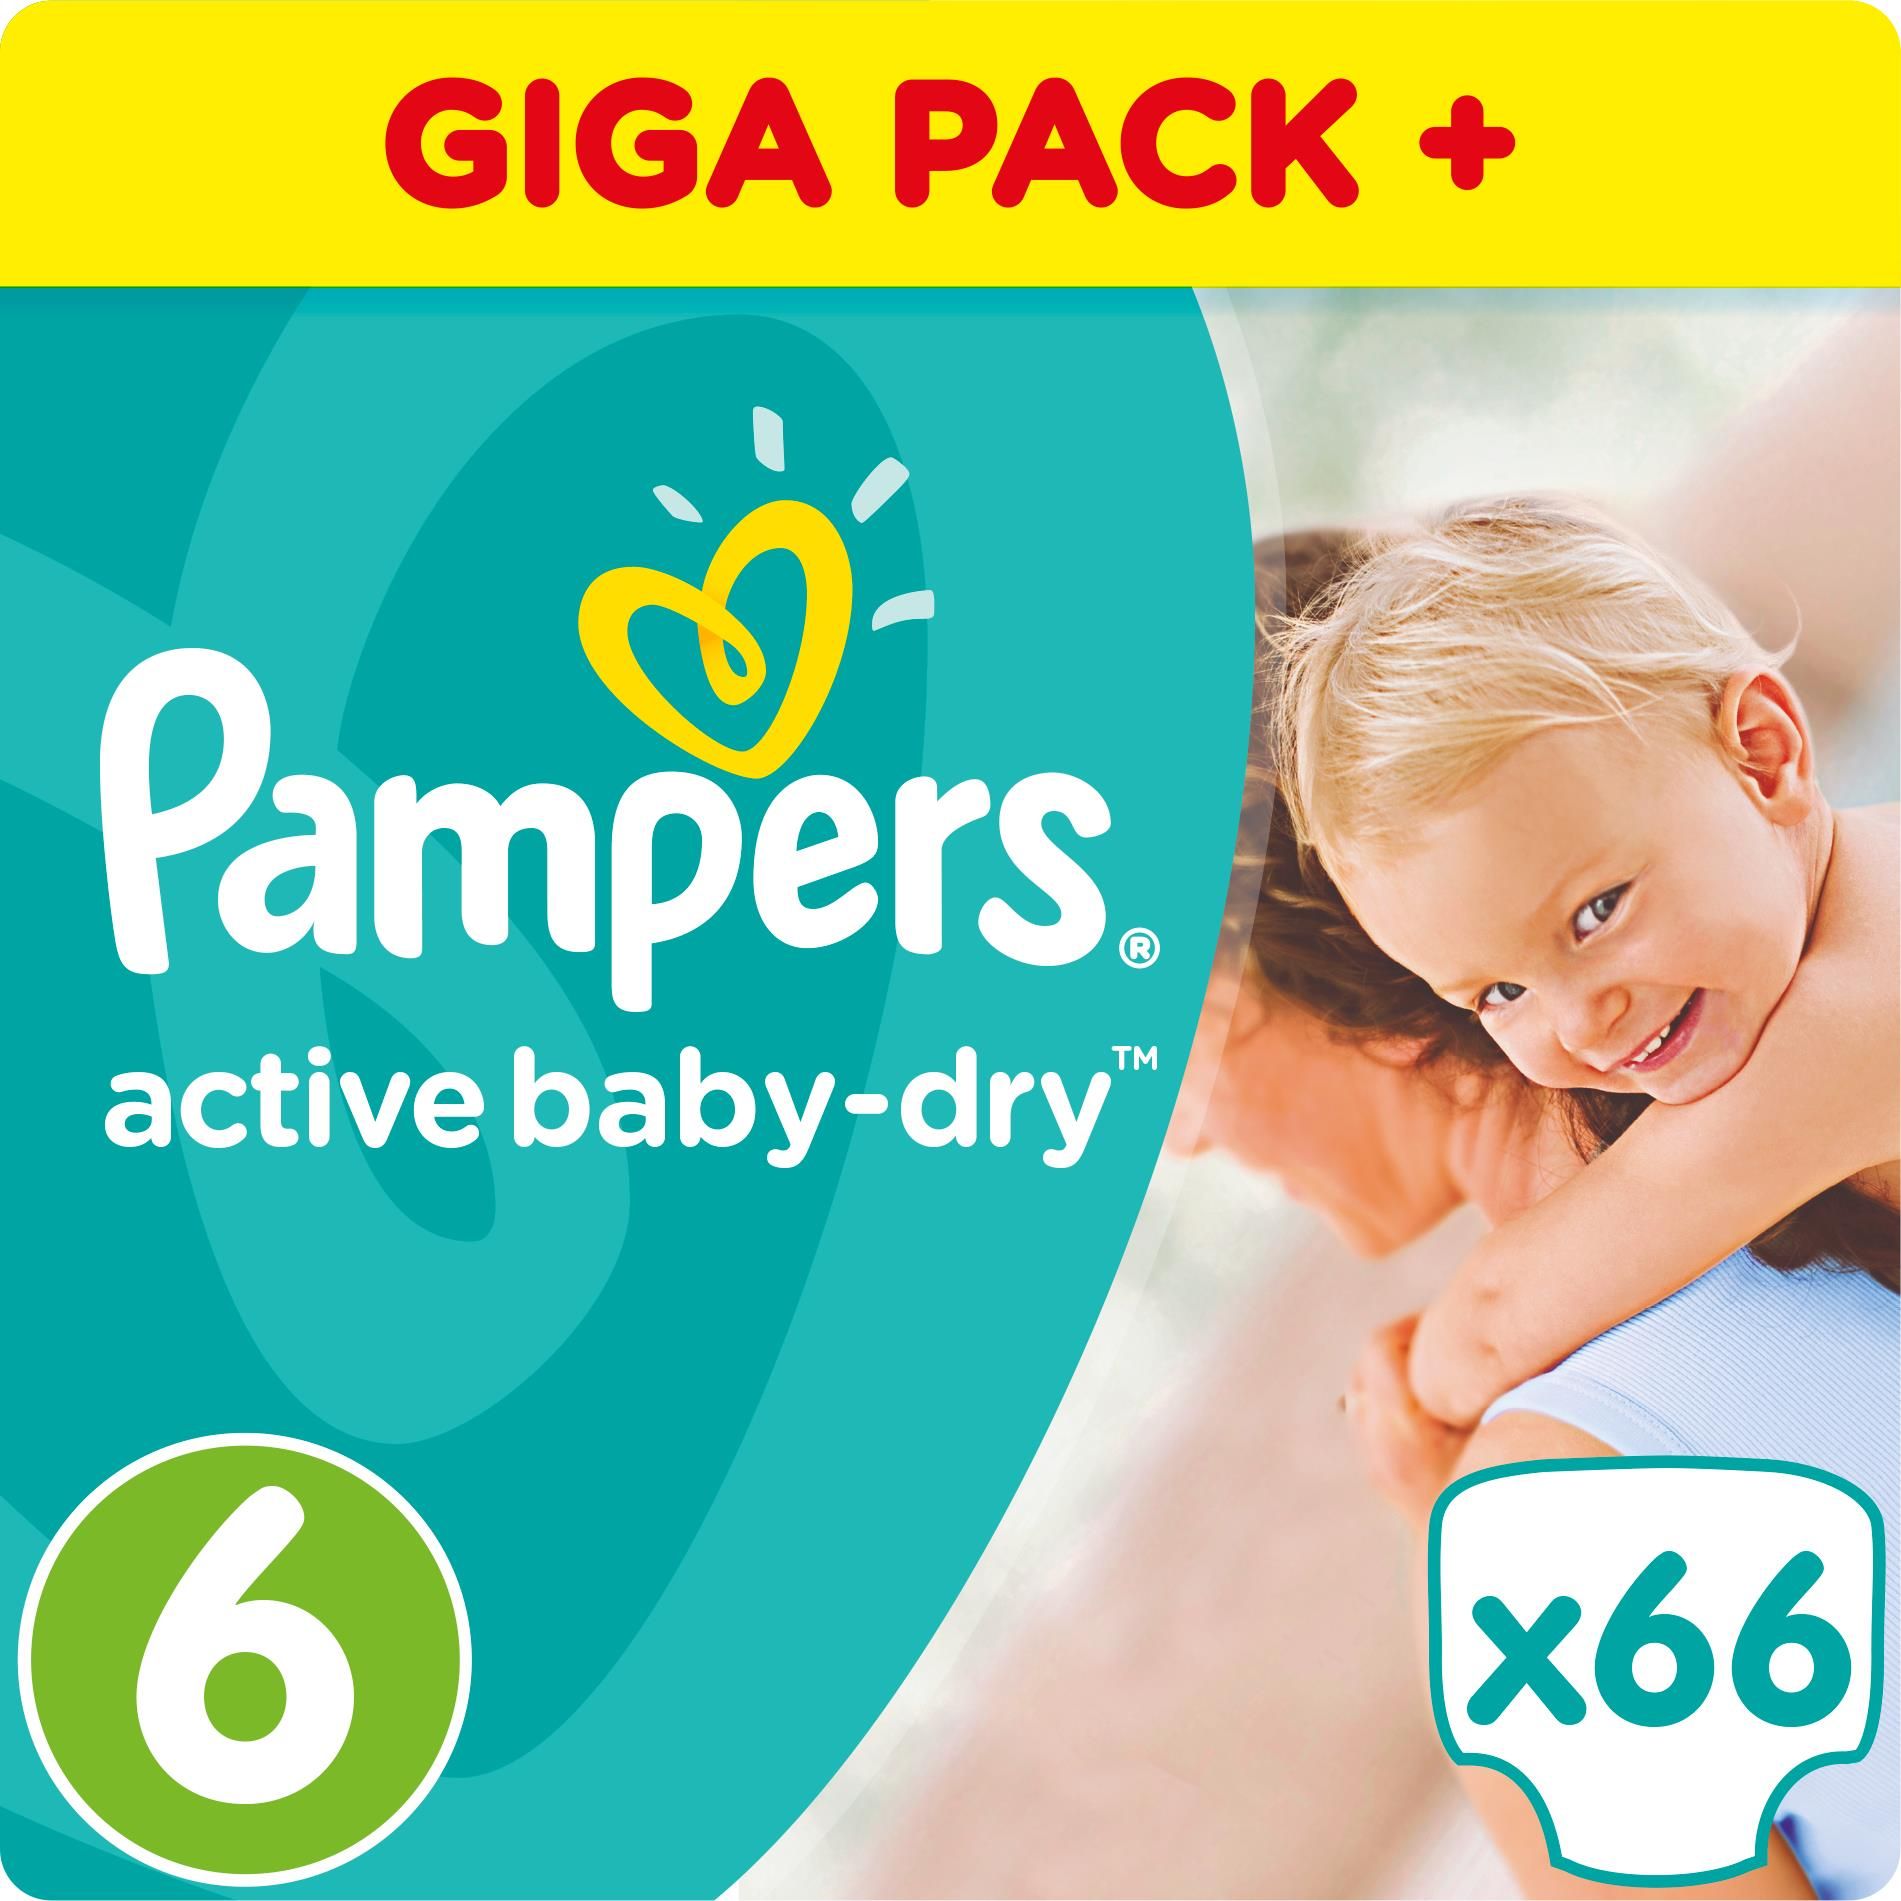 pampers active baby 6 ceneo